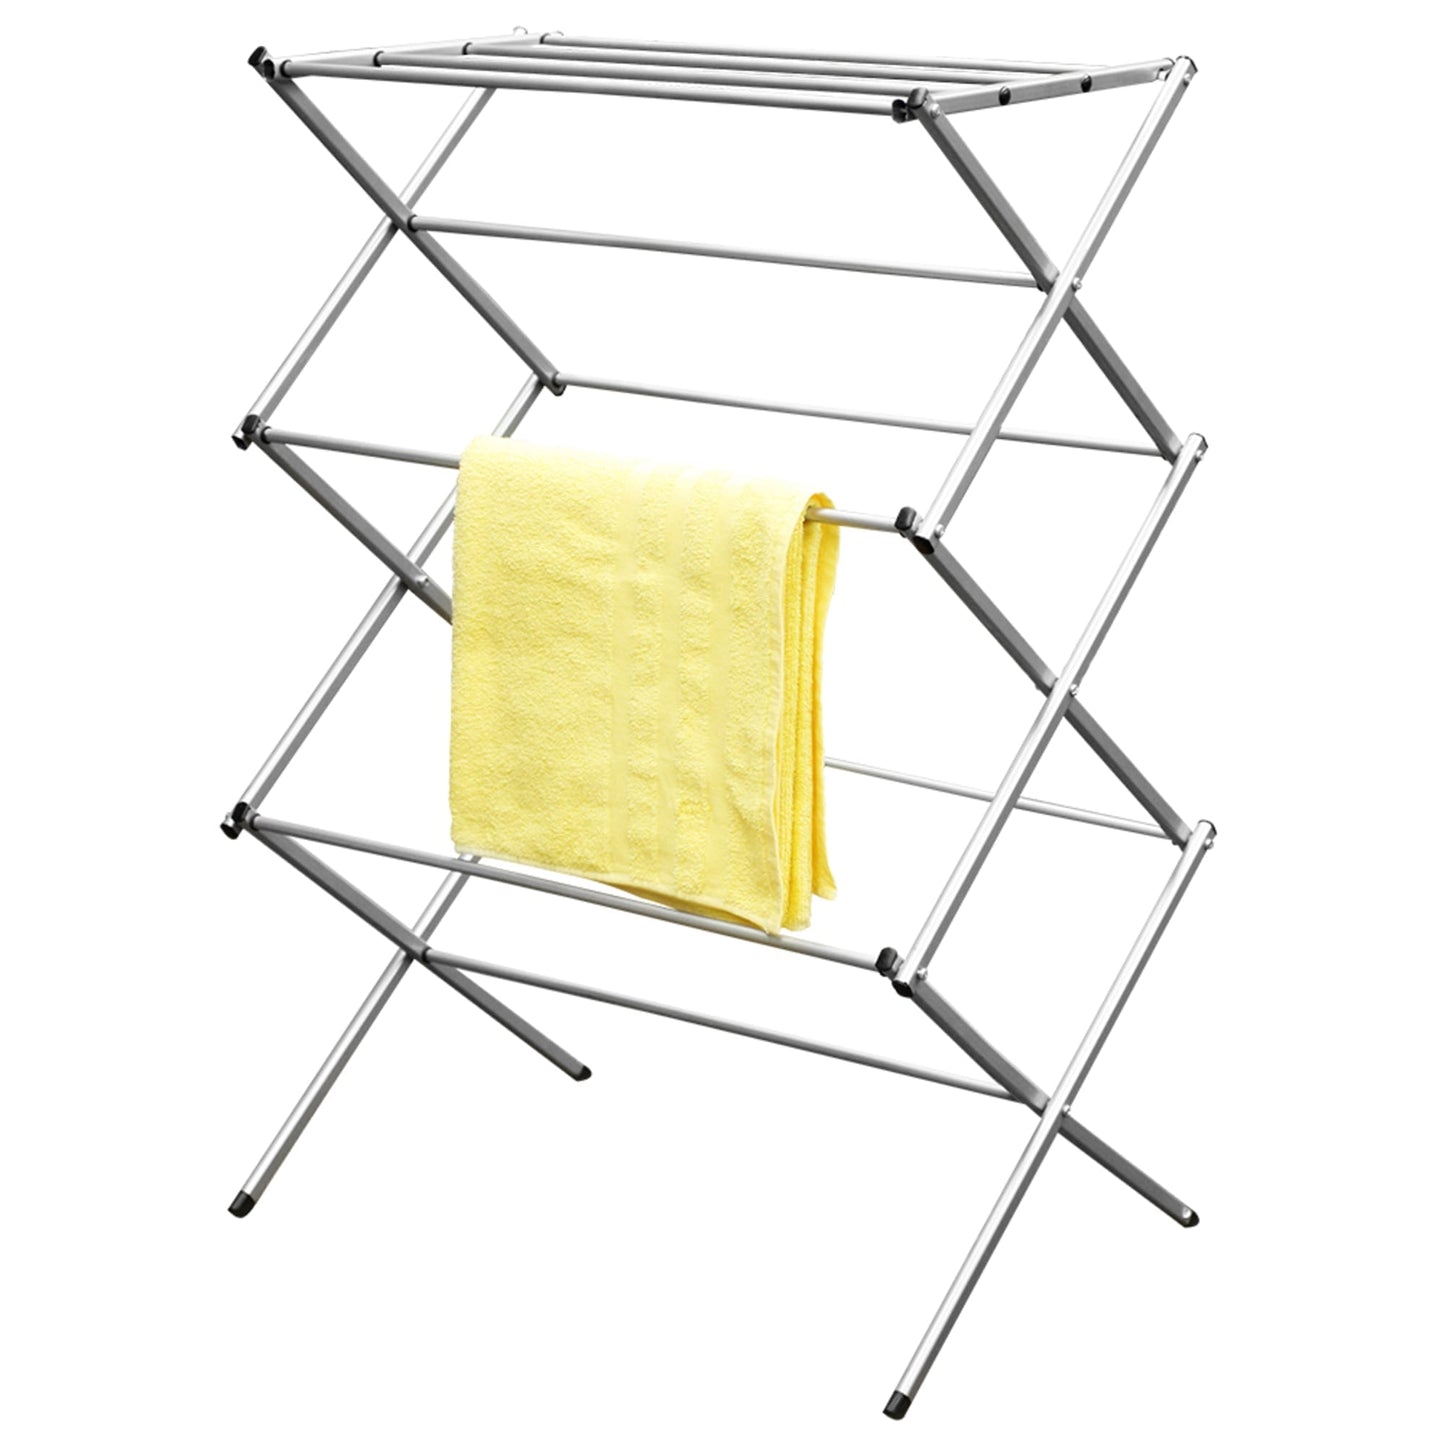 3 Tier Rust-Proof Enamel Coated Steel Collapsible Clothes Drying Rack, Grey